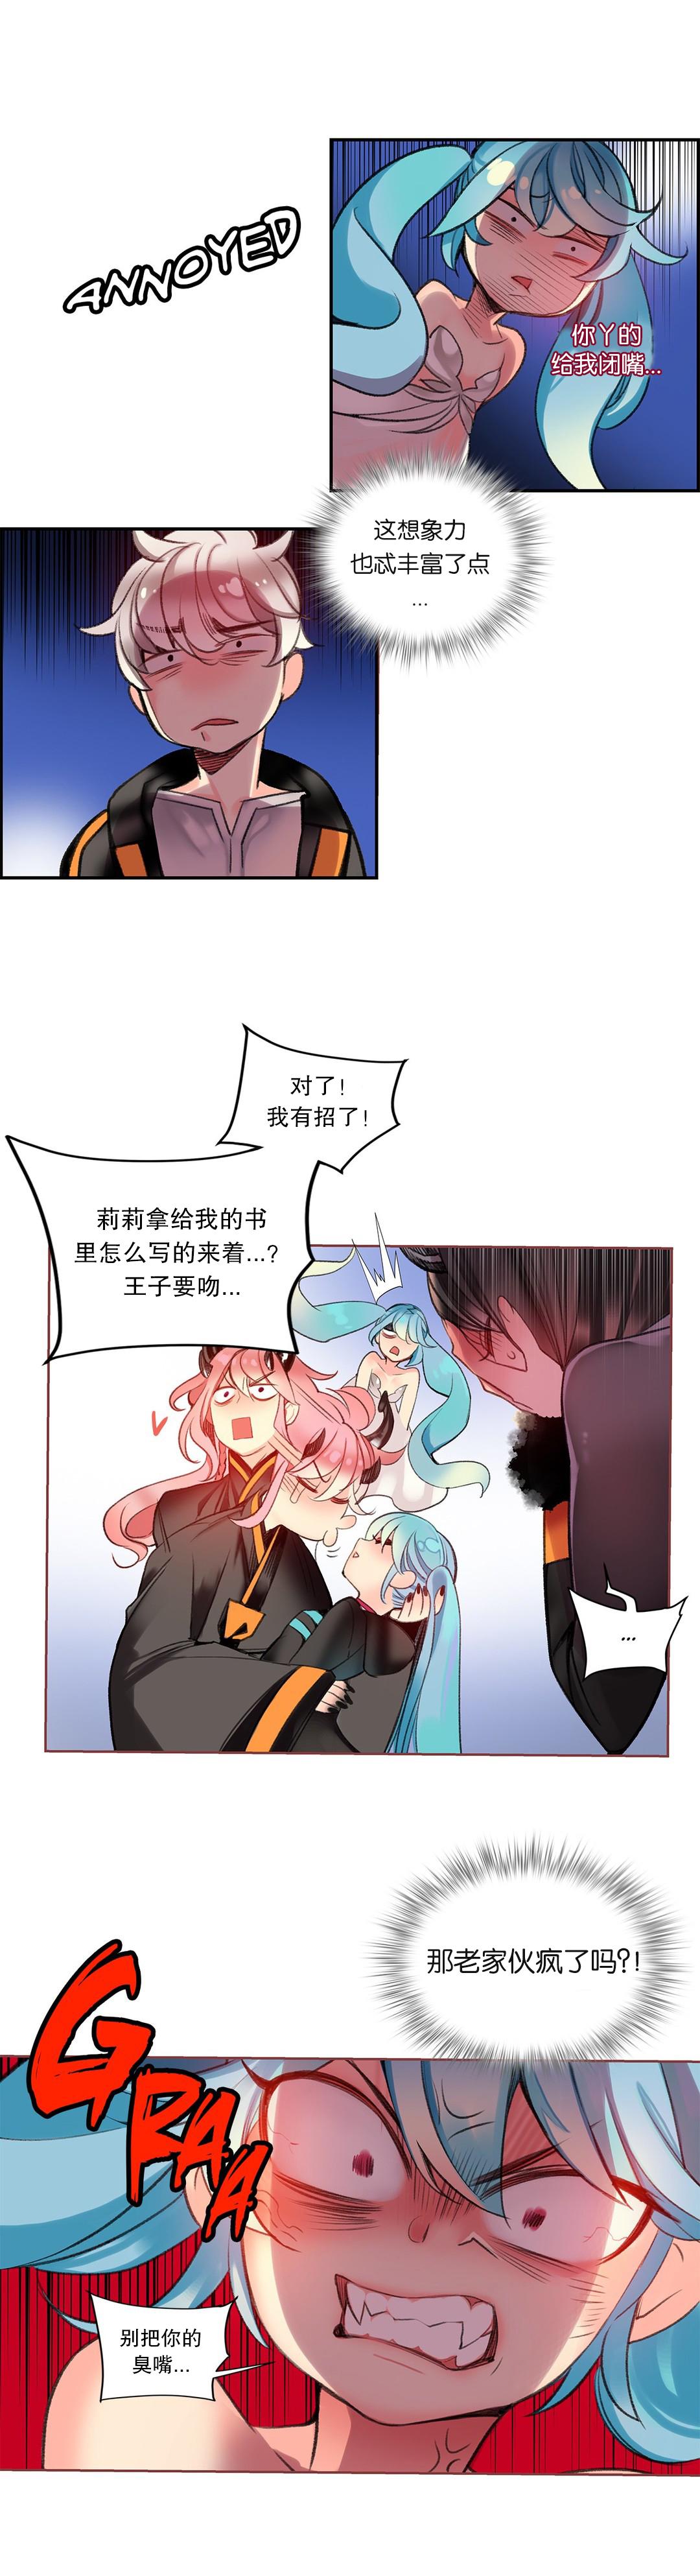 Softcore [Juder] Lilith`s Cord (第二季) Ch.61-64 [Chinese] [aaatwist个人汉化] [Ongoing] - Original Blowjobs - Page 9